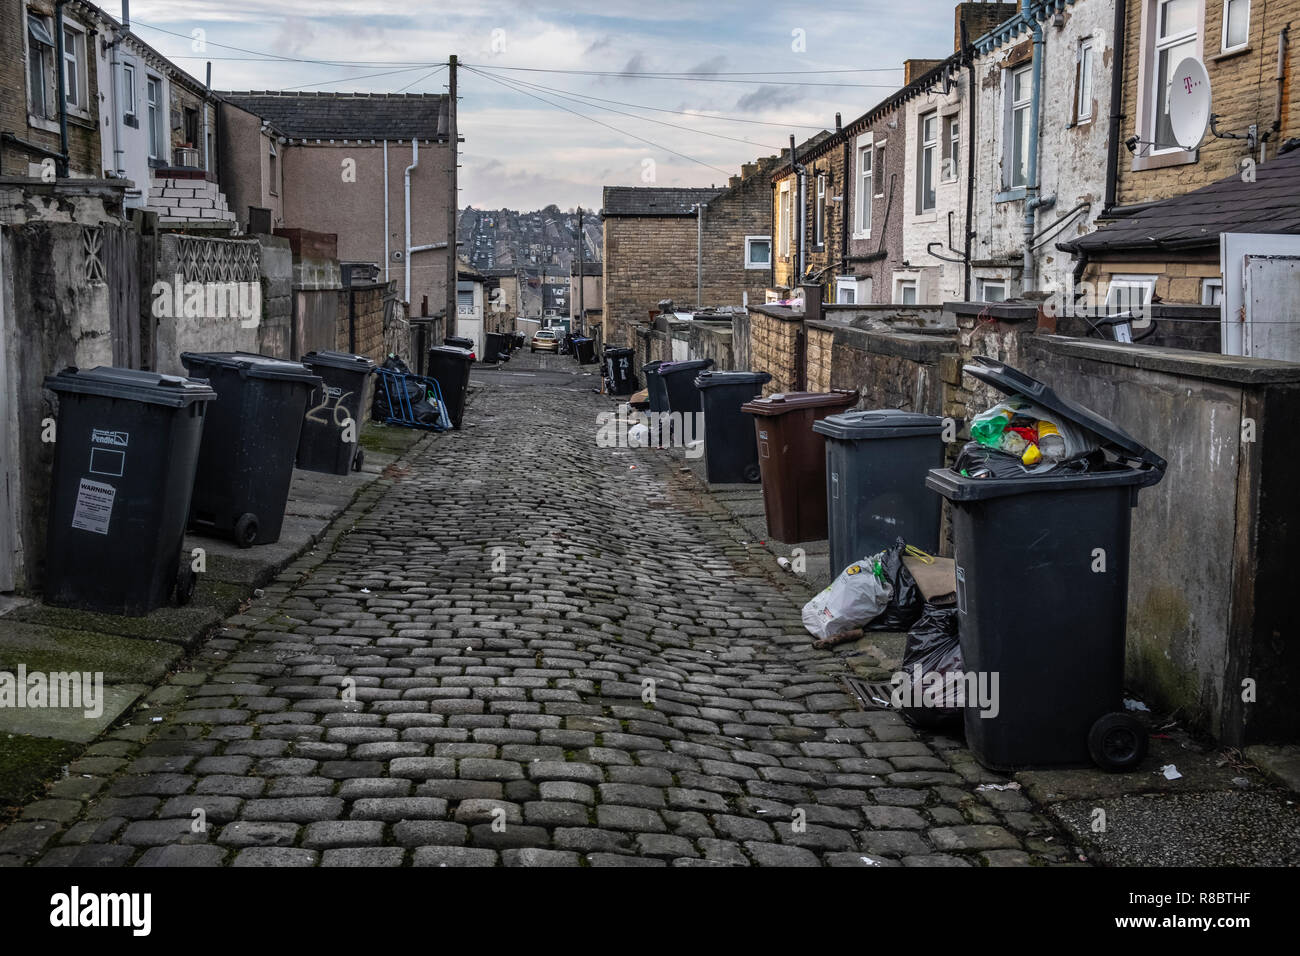 Wheelie bins and rubbish in a back alley in the former mill town of  Nelson, Lancashire Stock Photo